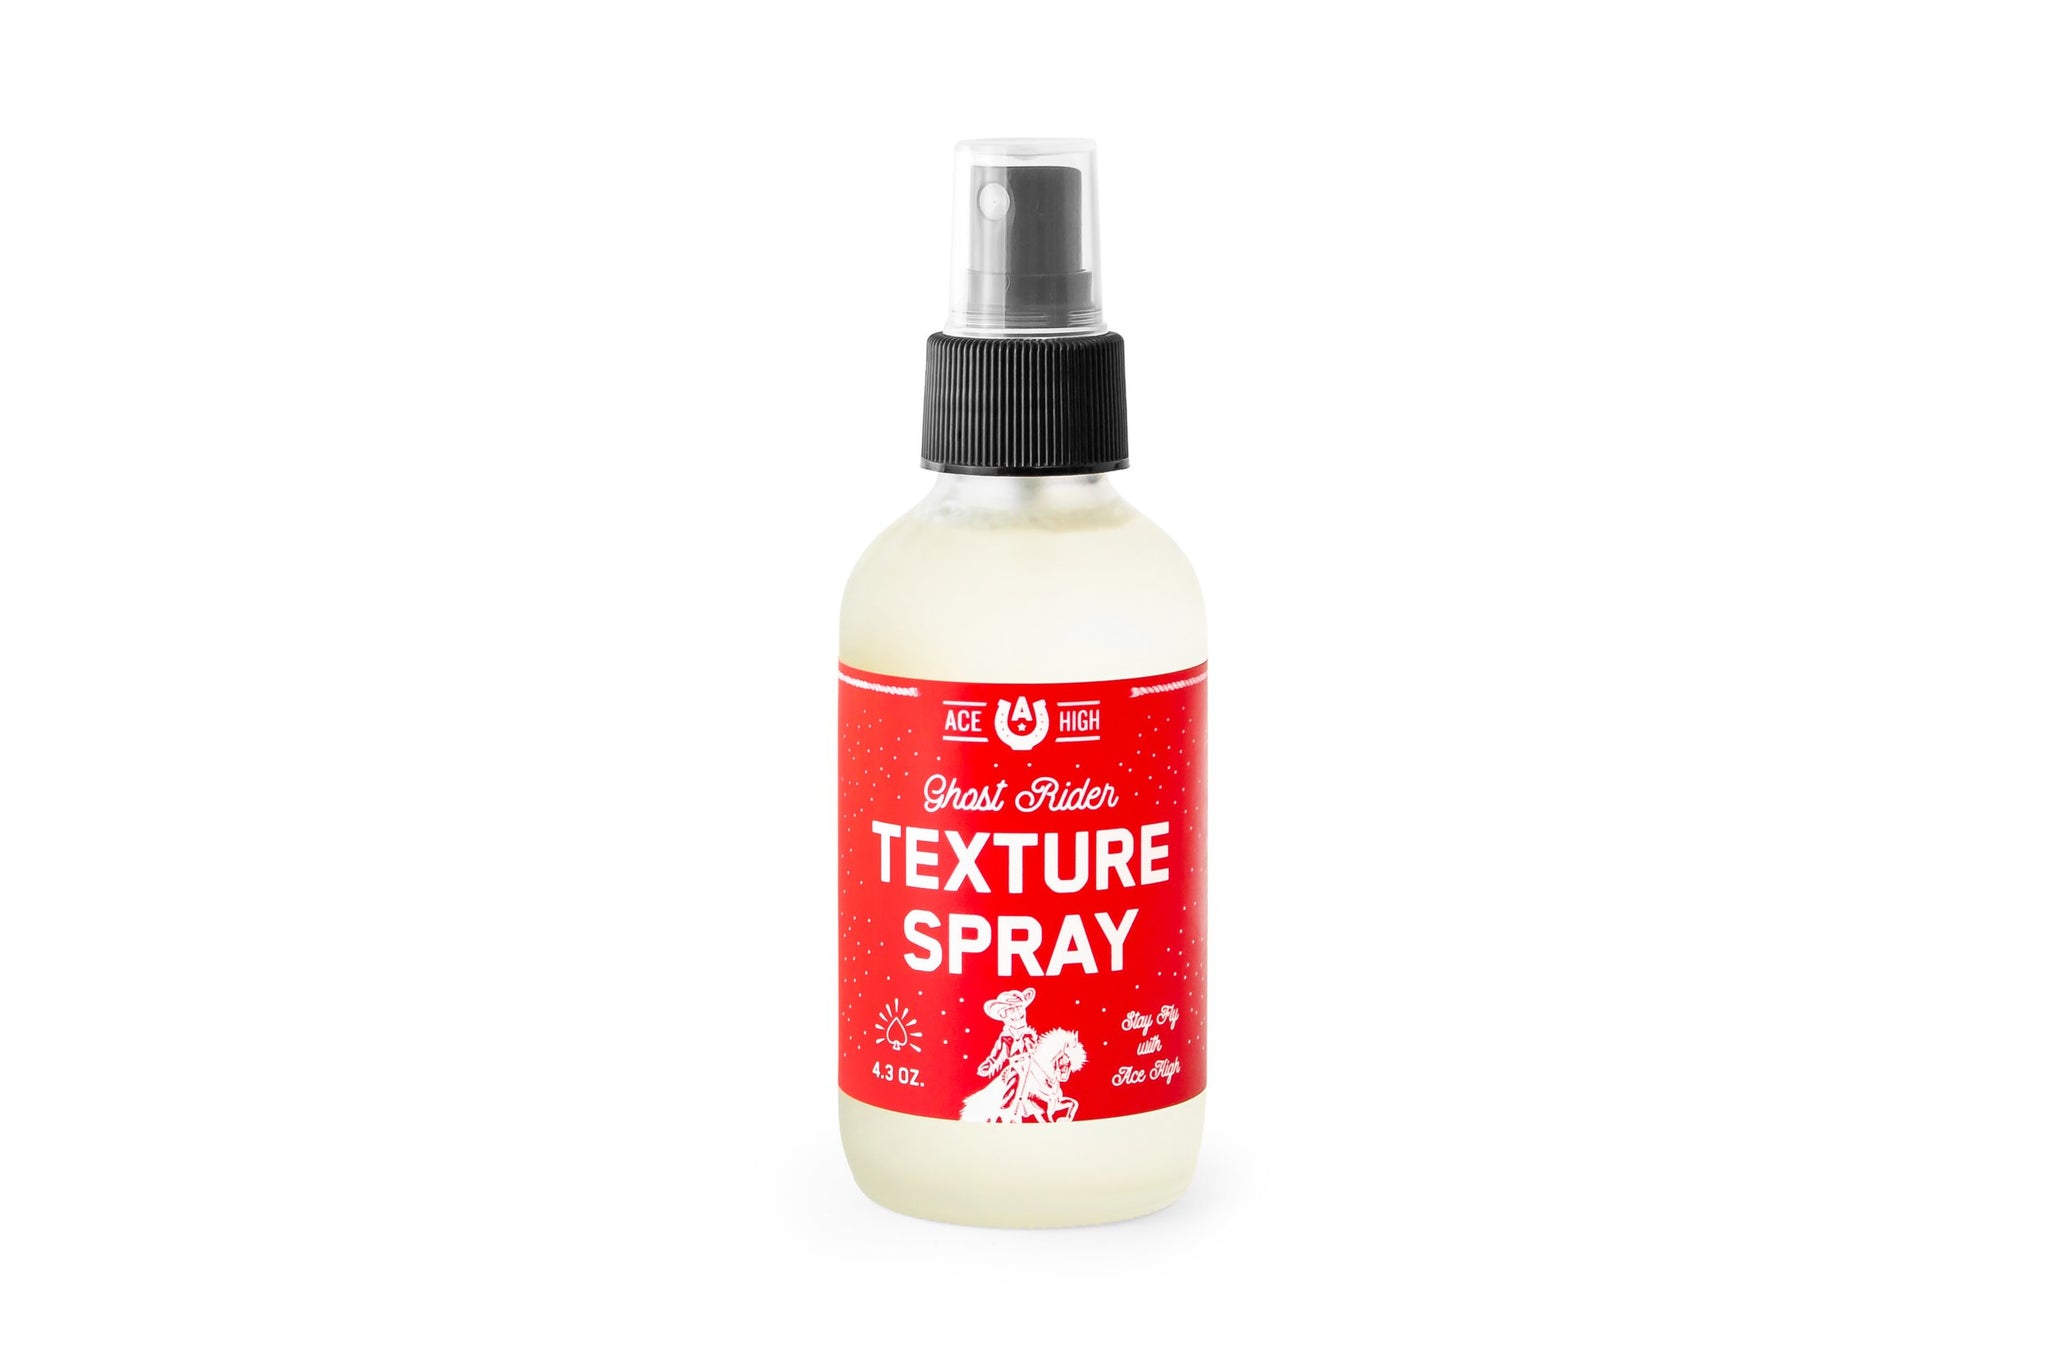 Texture Spray! What is it and How do I use it? – Ace High Co.